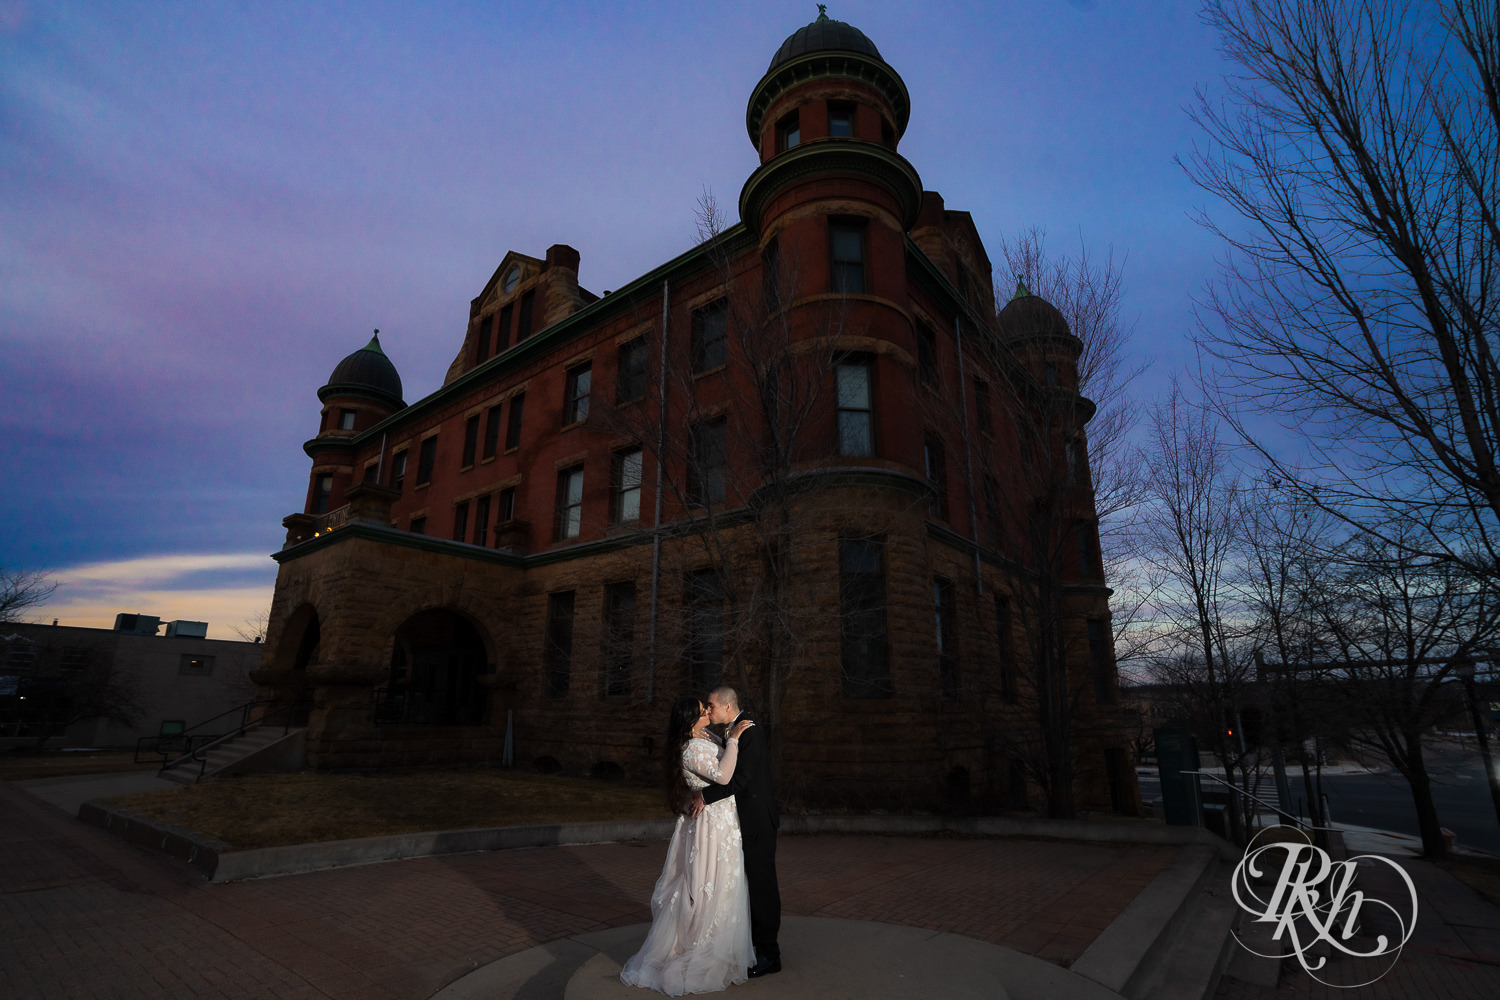 Mexican bride and groom kissing in front of the Historic Concord Exchange in Saint Paul, Minnesota.